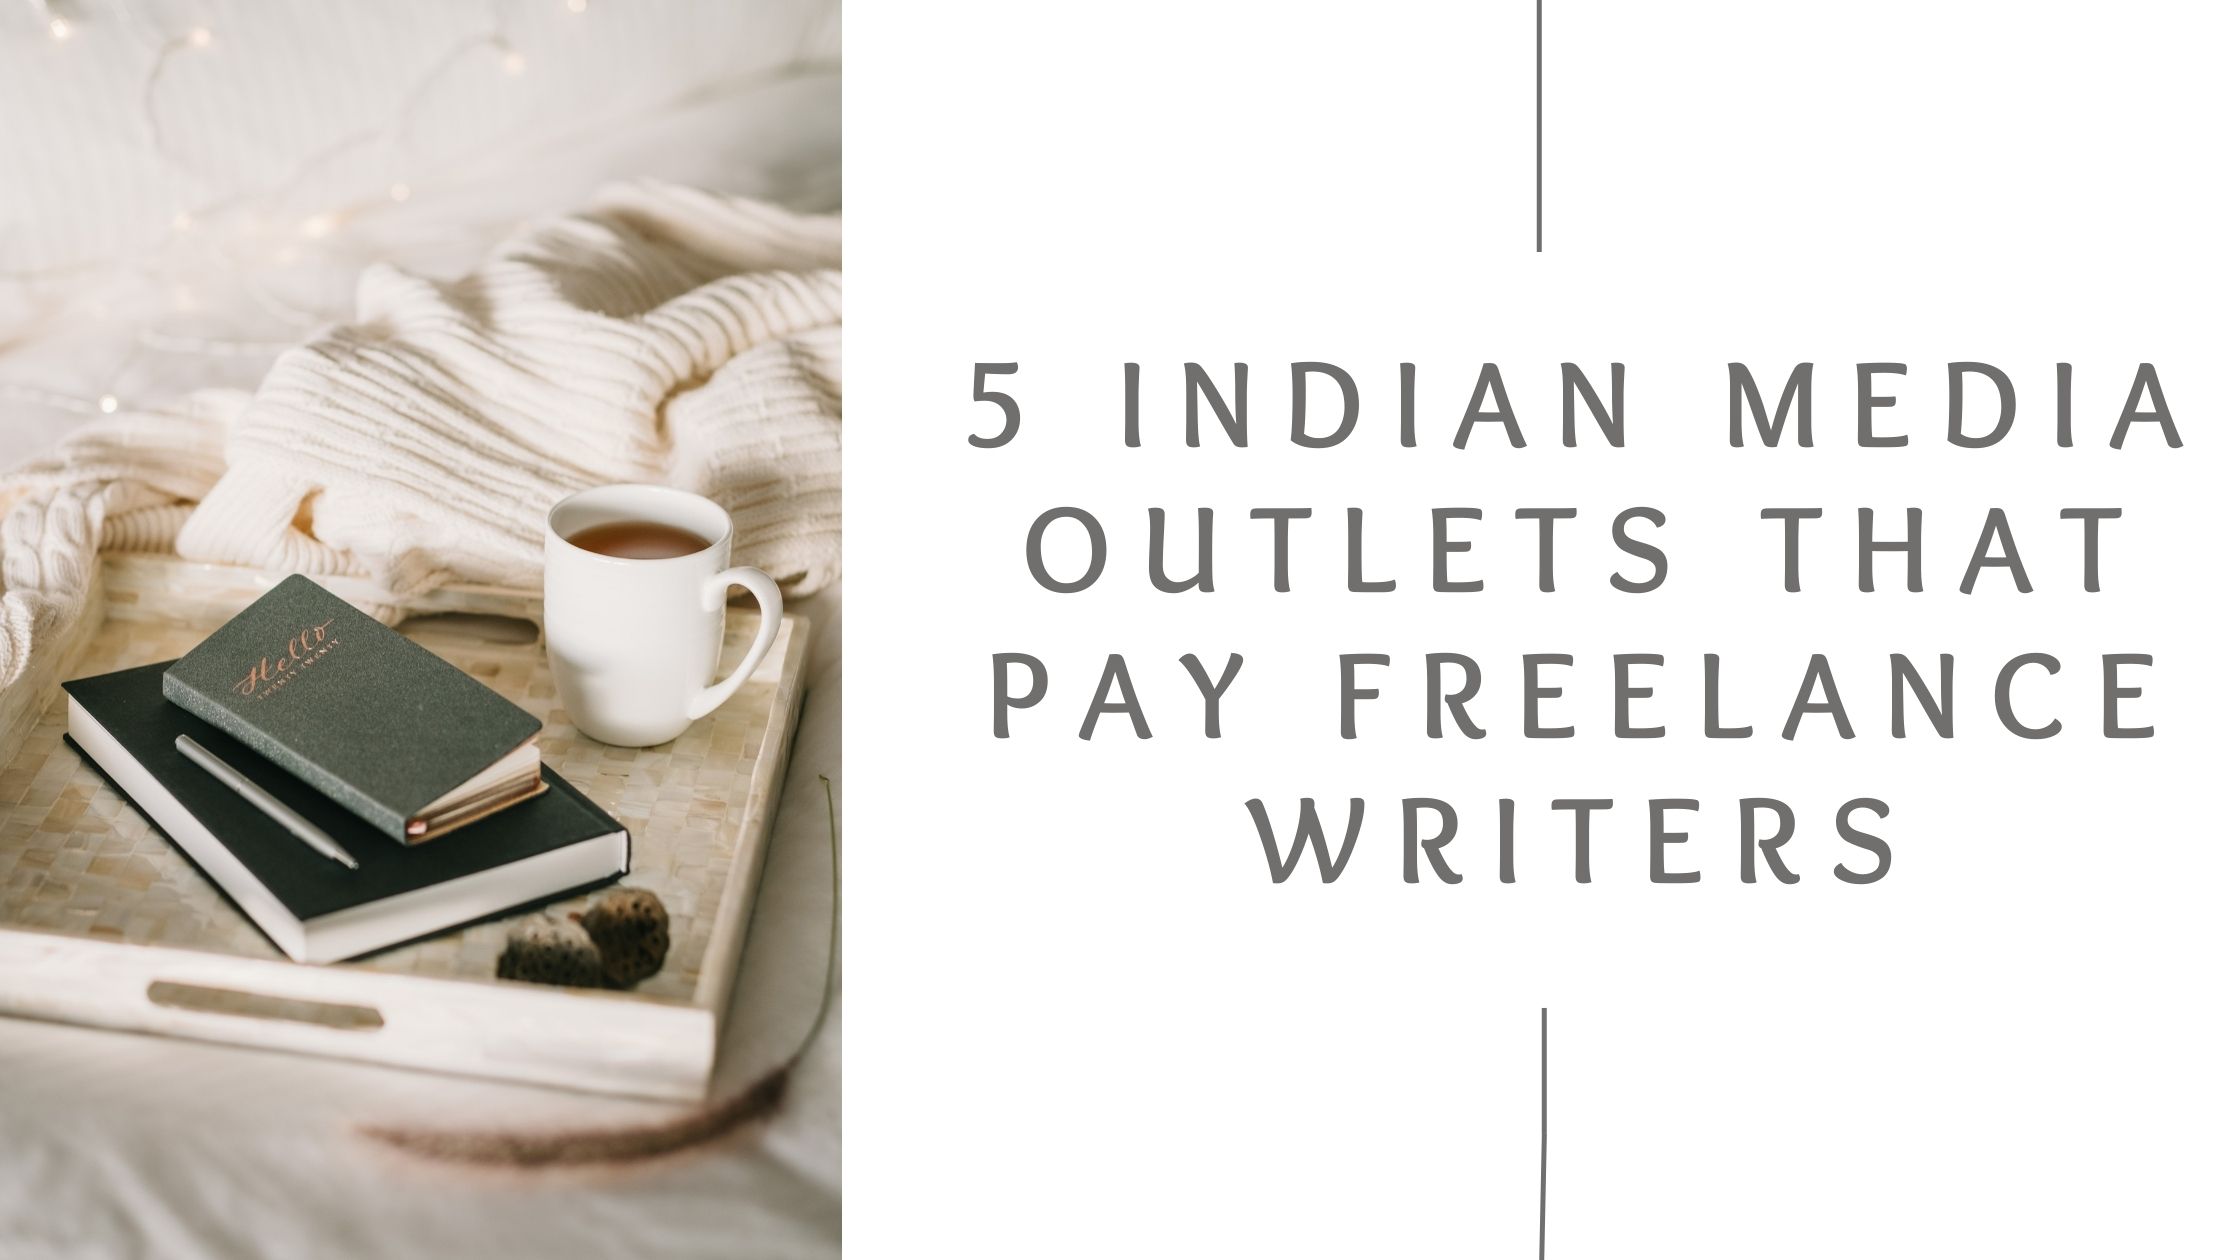 5 Indian Media Outlets that Pay Freelance Writers